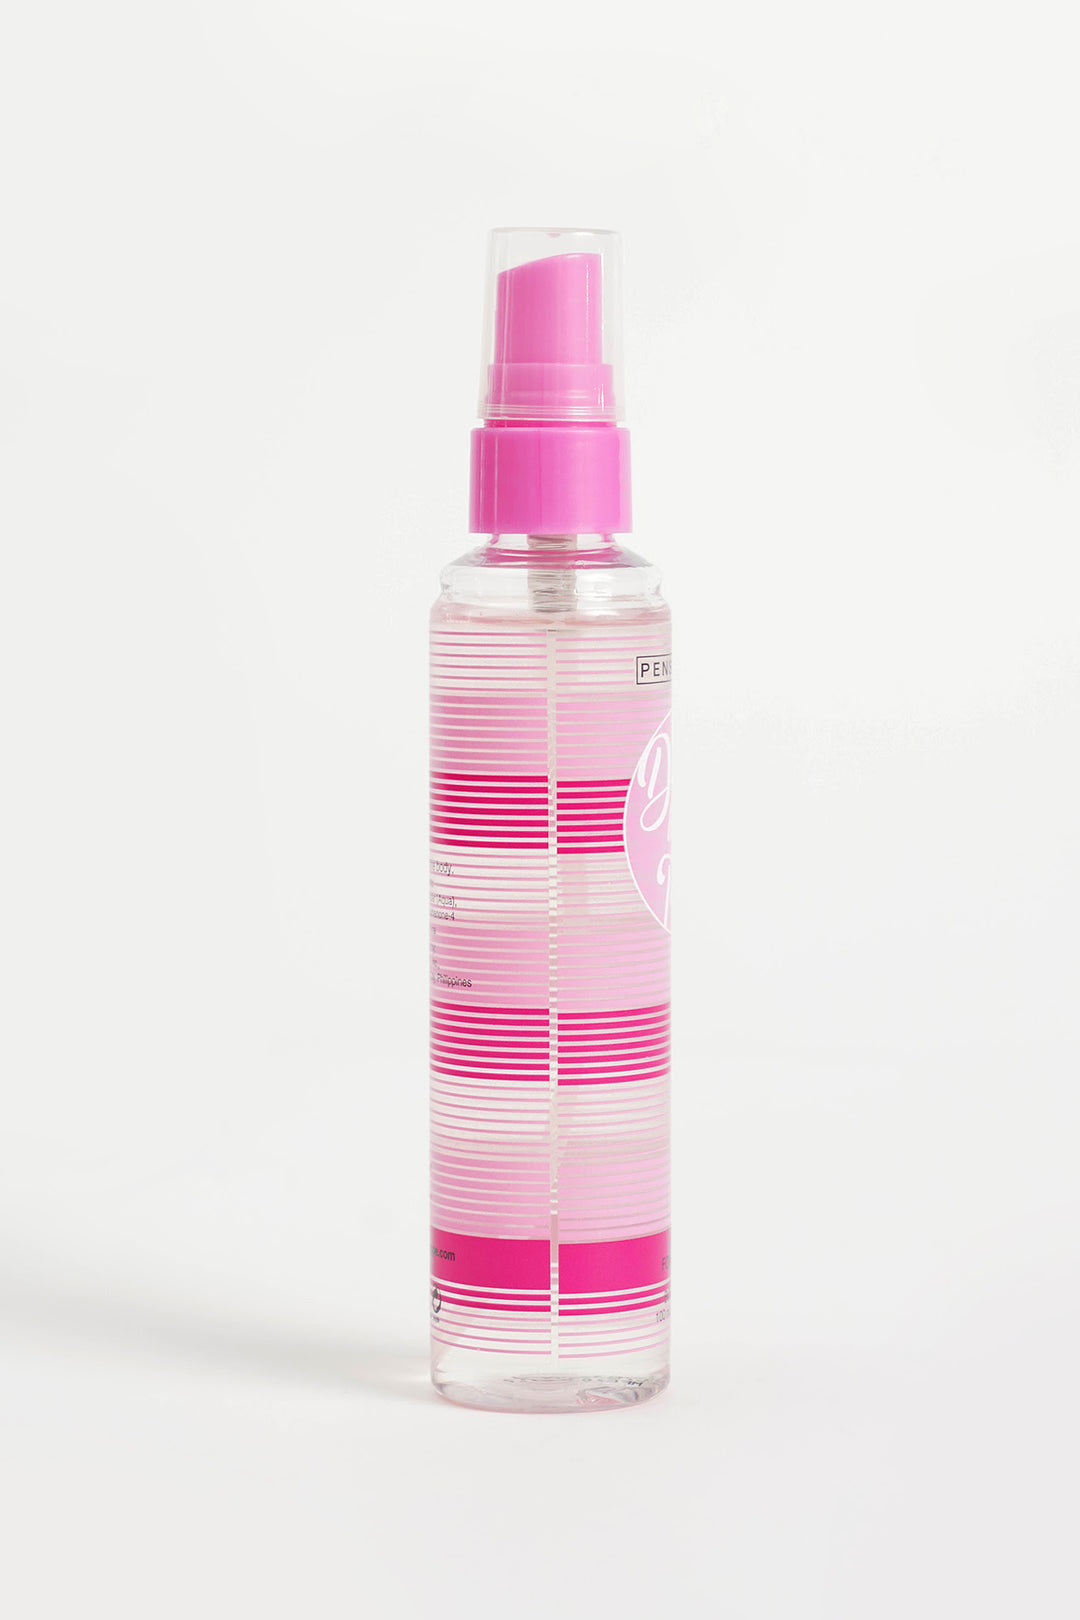 Days Like This Pink Body Mist For Women 100ML